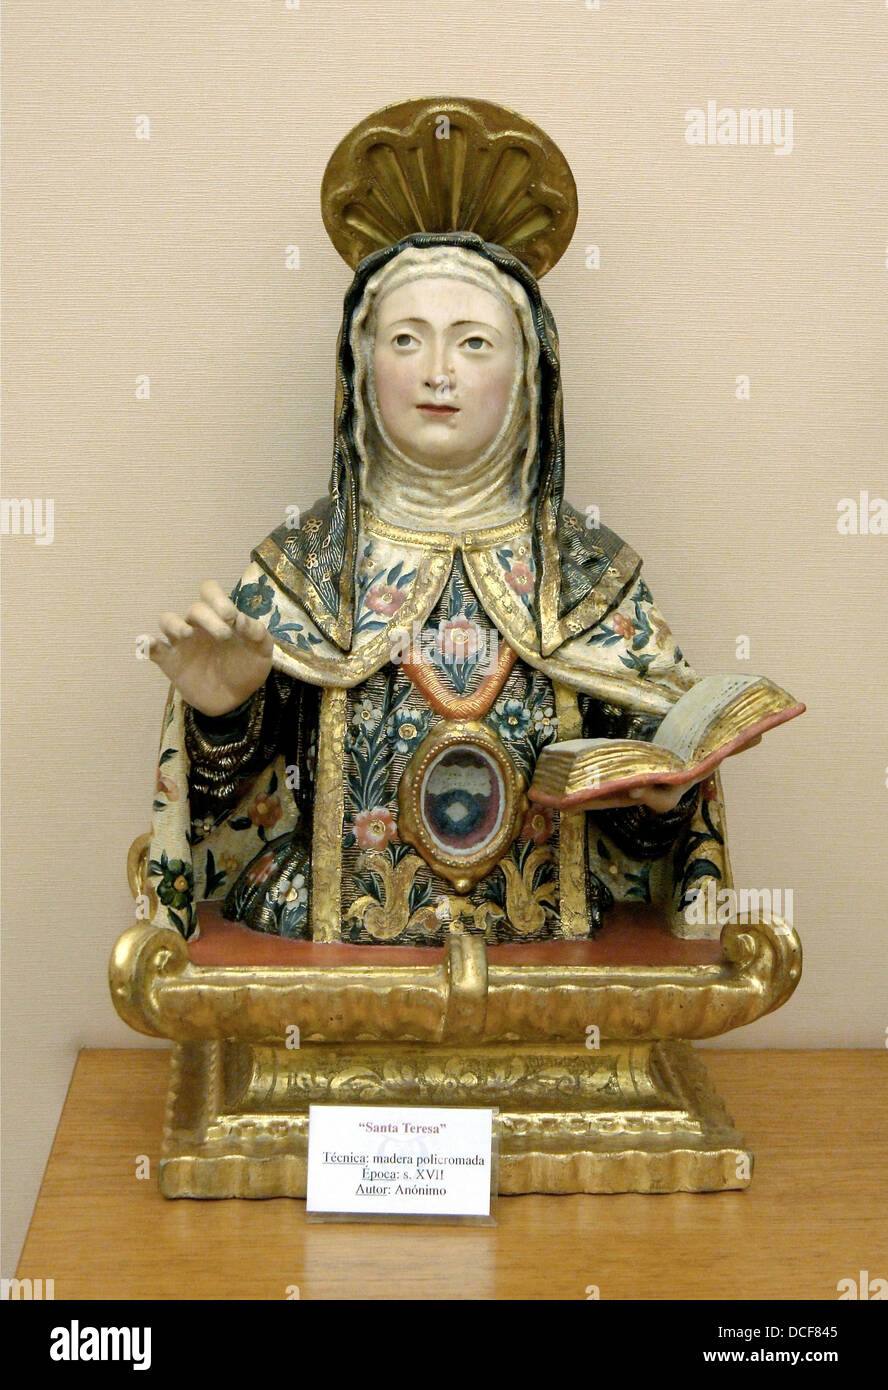 Saint Teresa of Avila, reliquary, Polychrom wood, 17th century, anonymous. Treasure of the cathedral of Guadix, Andalusia, Spain Stock Photo